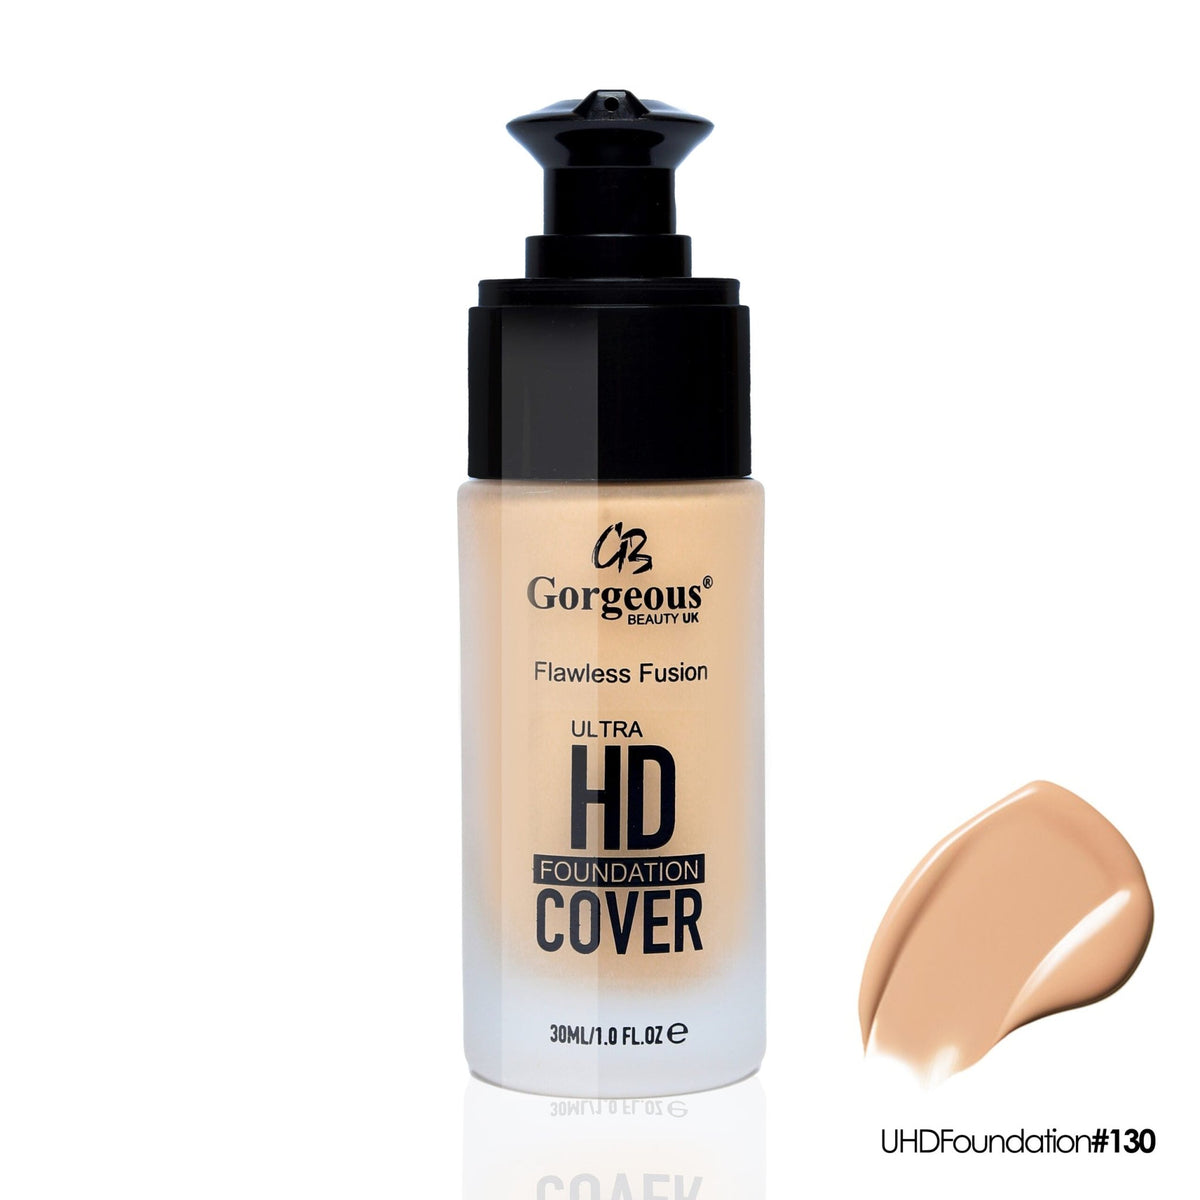 Gorgeous Beauty Flawless Fusion Hd Ultra Foundation Cover-130 Nude Almond 30Ml - AllurebeautypkGorgeous Beauty Flawless Fusion Hd Ultra Foundation Cover-130 Nude Almond 30Ml